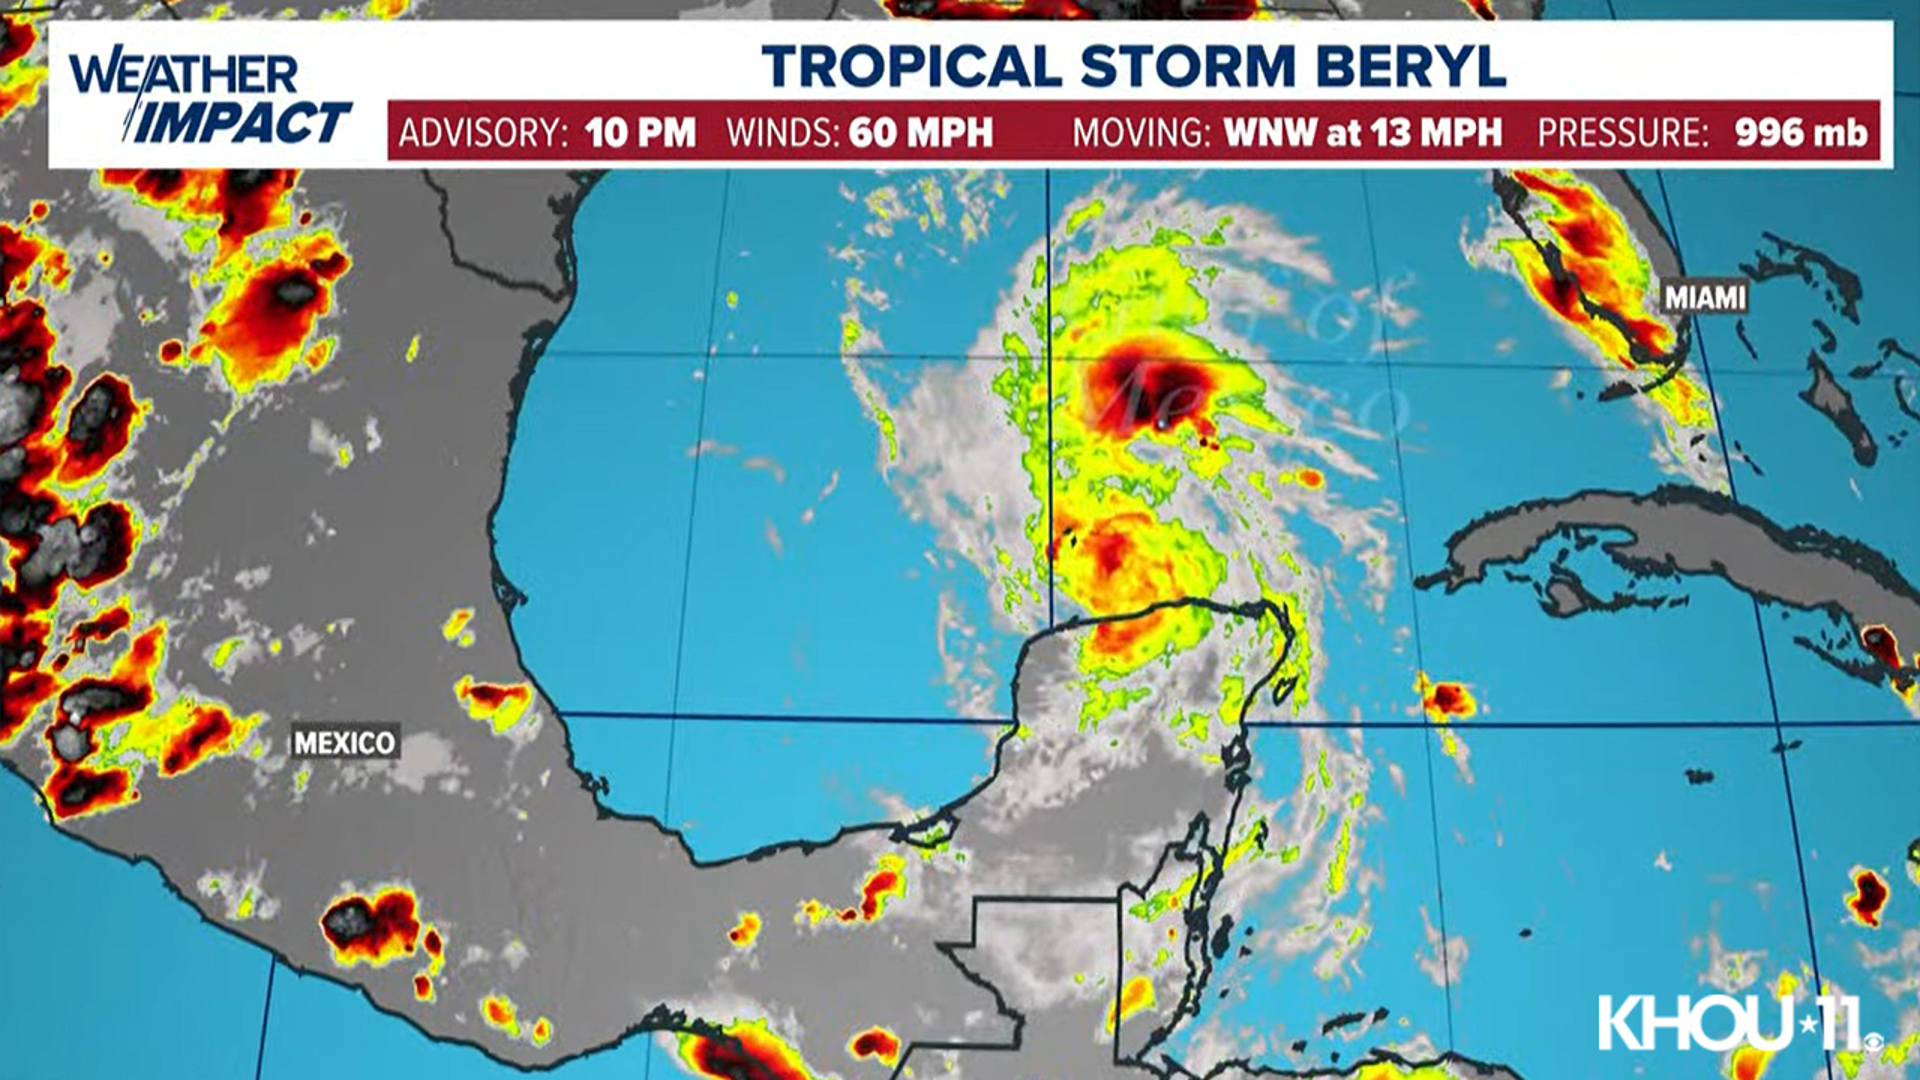 Tropical Storm Beryl is moving inland on the Yucatan Peninsula before heading into the Gulf of Mexico.